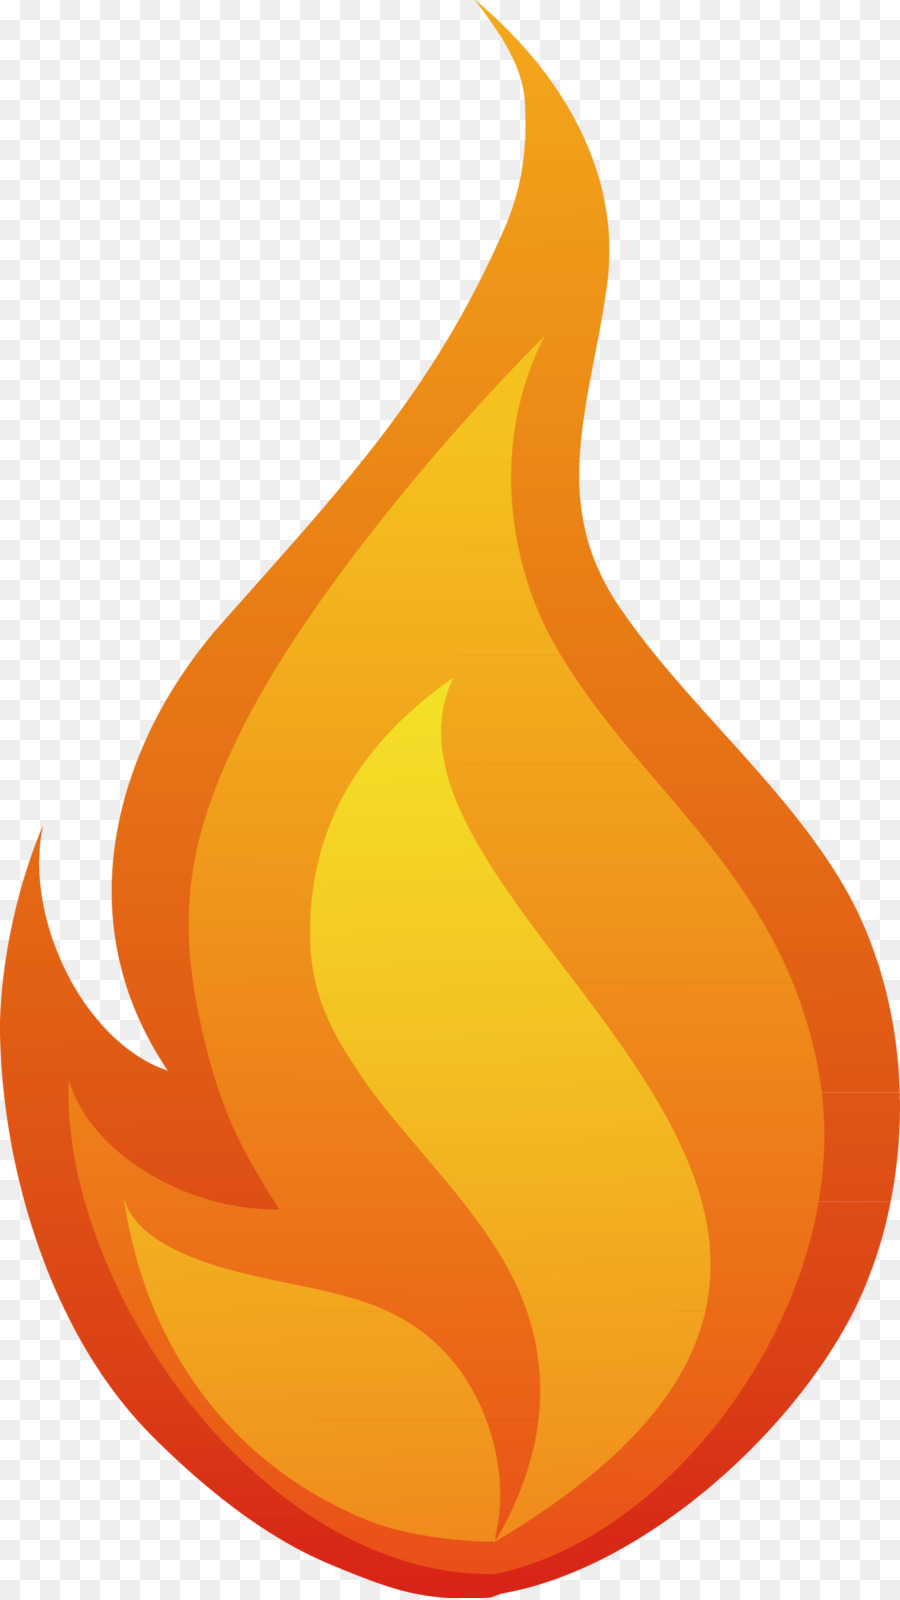 Flame Fire Clip art - Flame hand painted vector png download - 1466*2603 - Free Transparent Flame png Download.